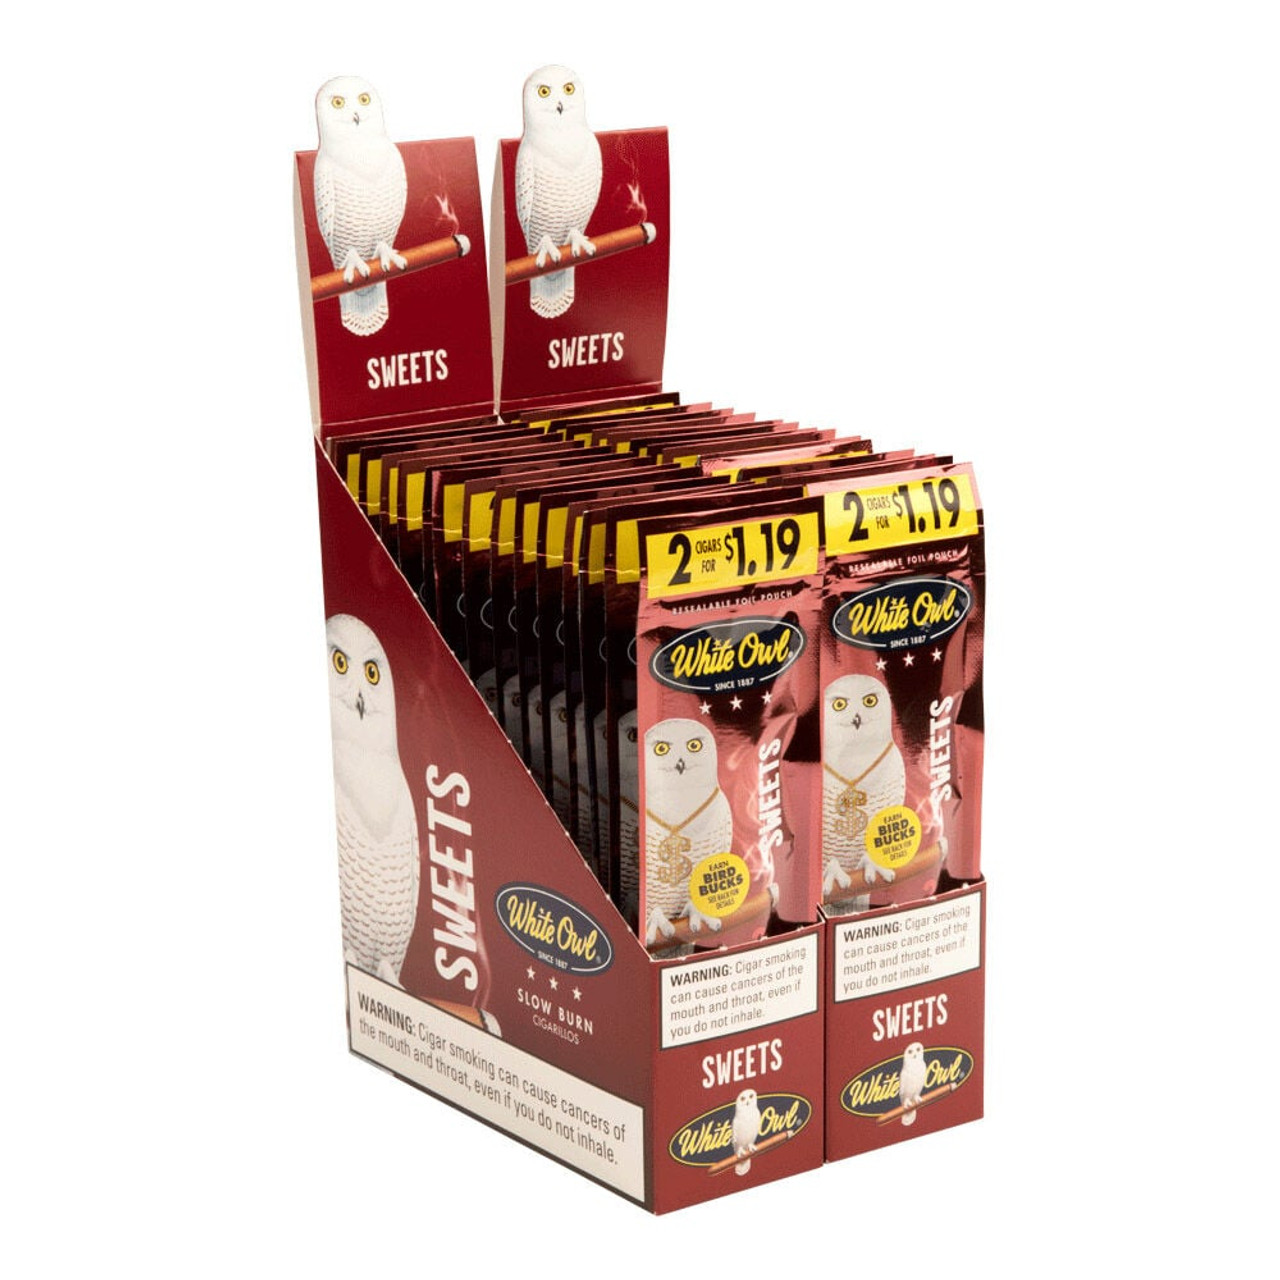 White Owl Cigarillos Sweets Cigars - 4.37 x 28 (30 Packs of 2 (60 Total)) *Box